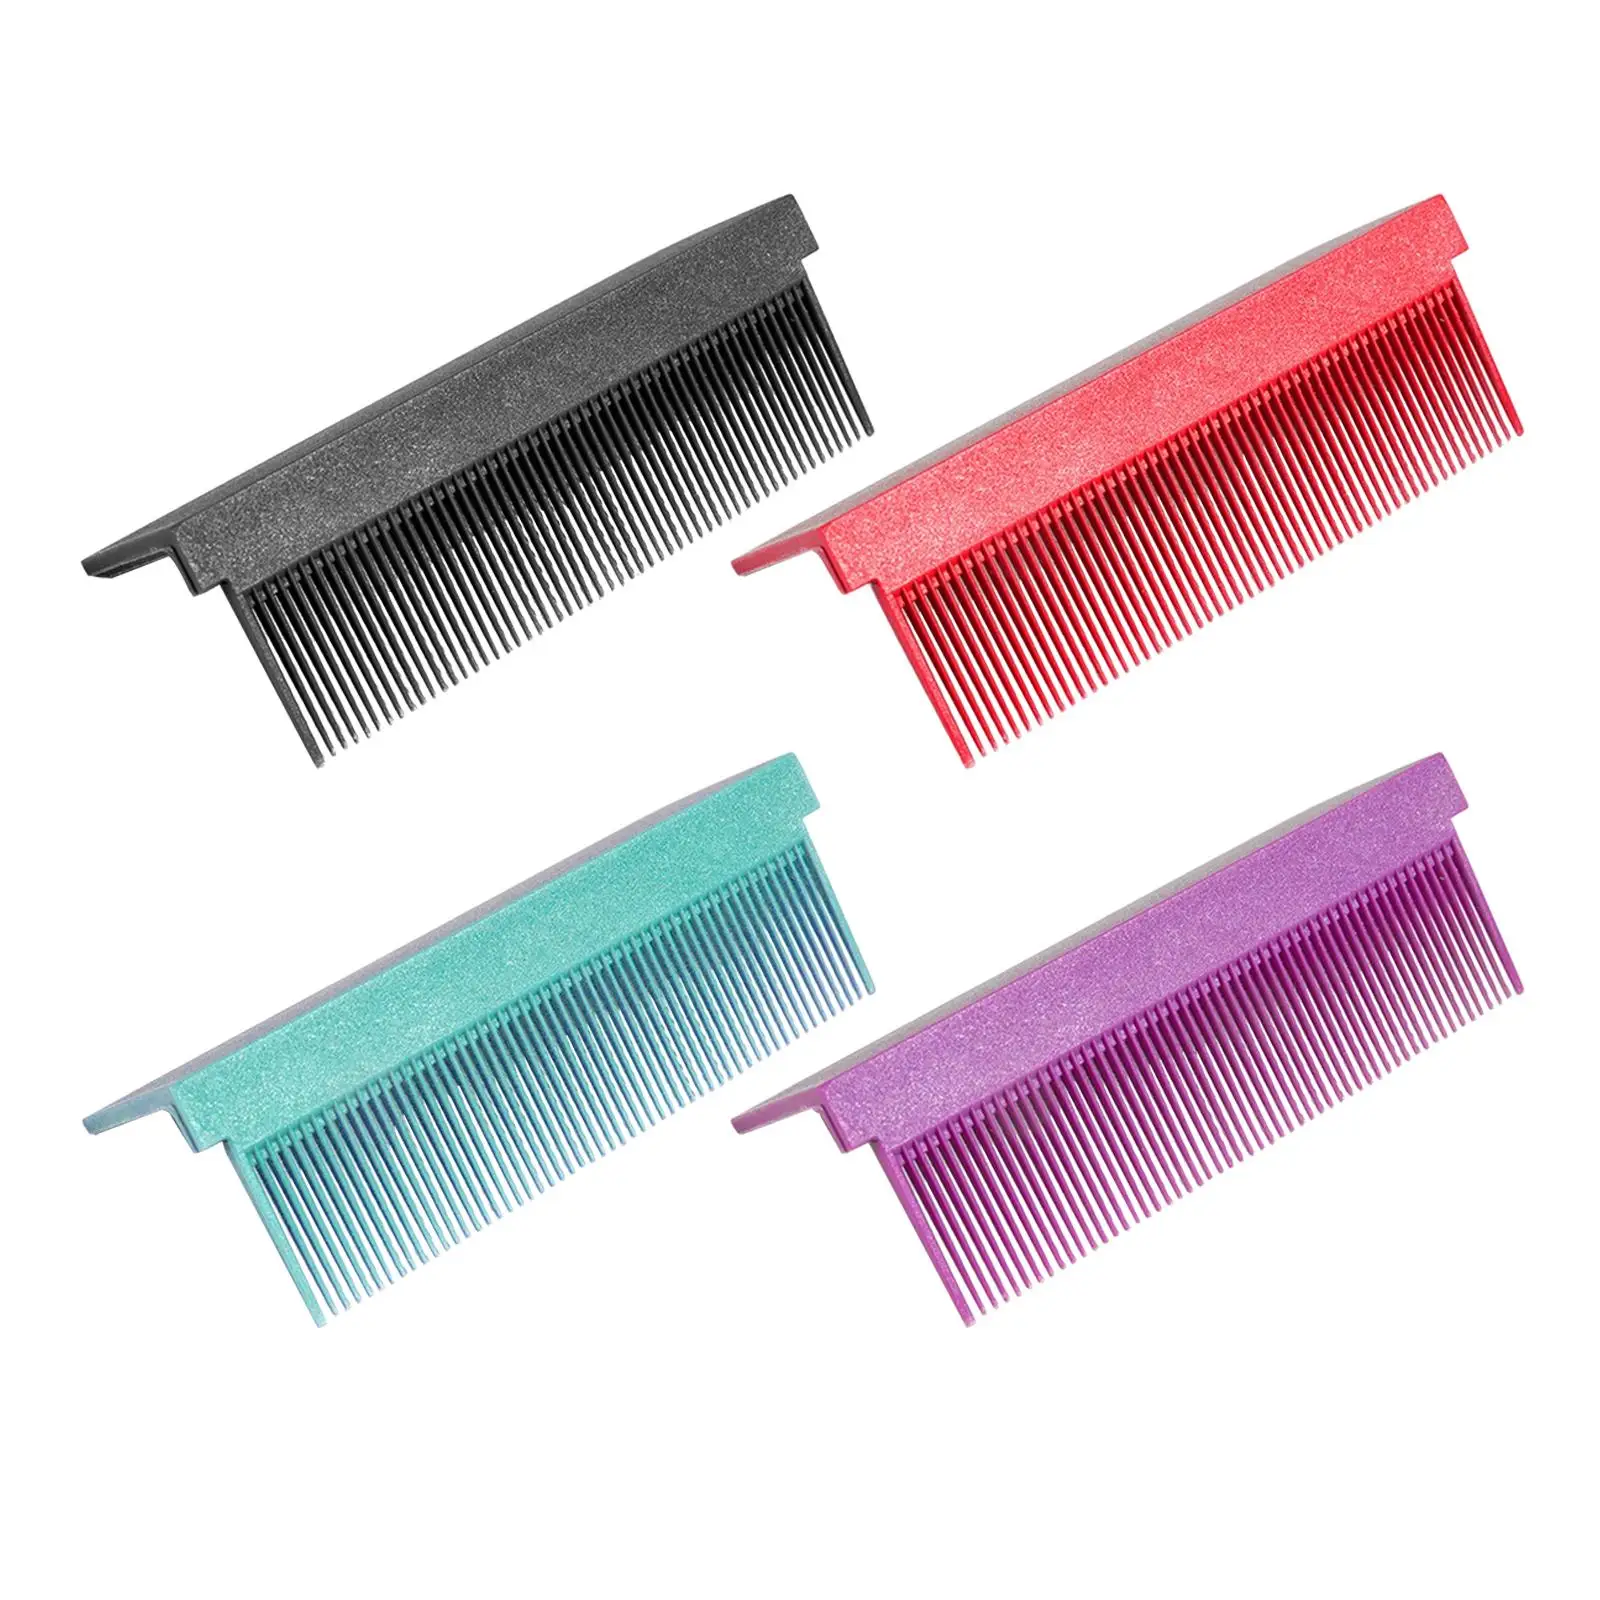 

Straightening Comb Attachment for Folding Hair Straightener Easily Install Convenient Compact Washable Hairdressing Lightweight